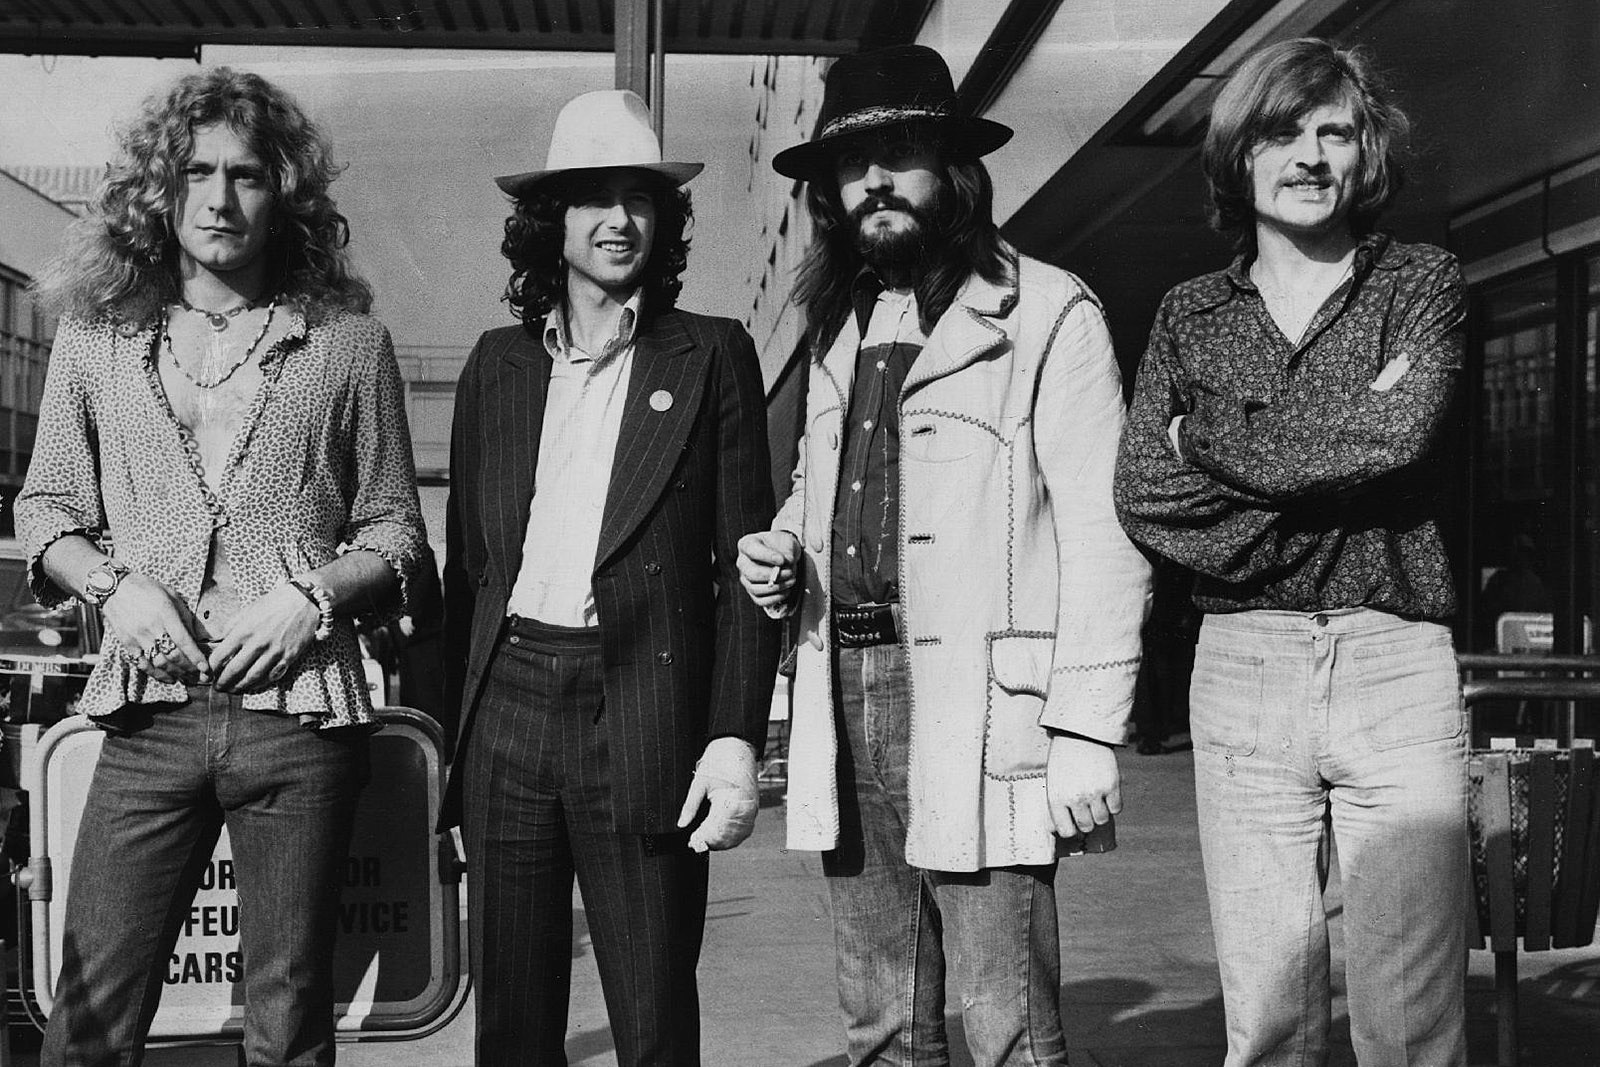 Robert Plant Recalls 'Daunting' Moment He Joined Led Zeppelin